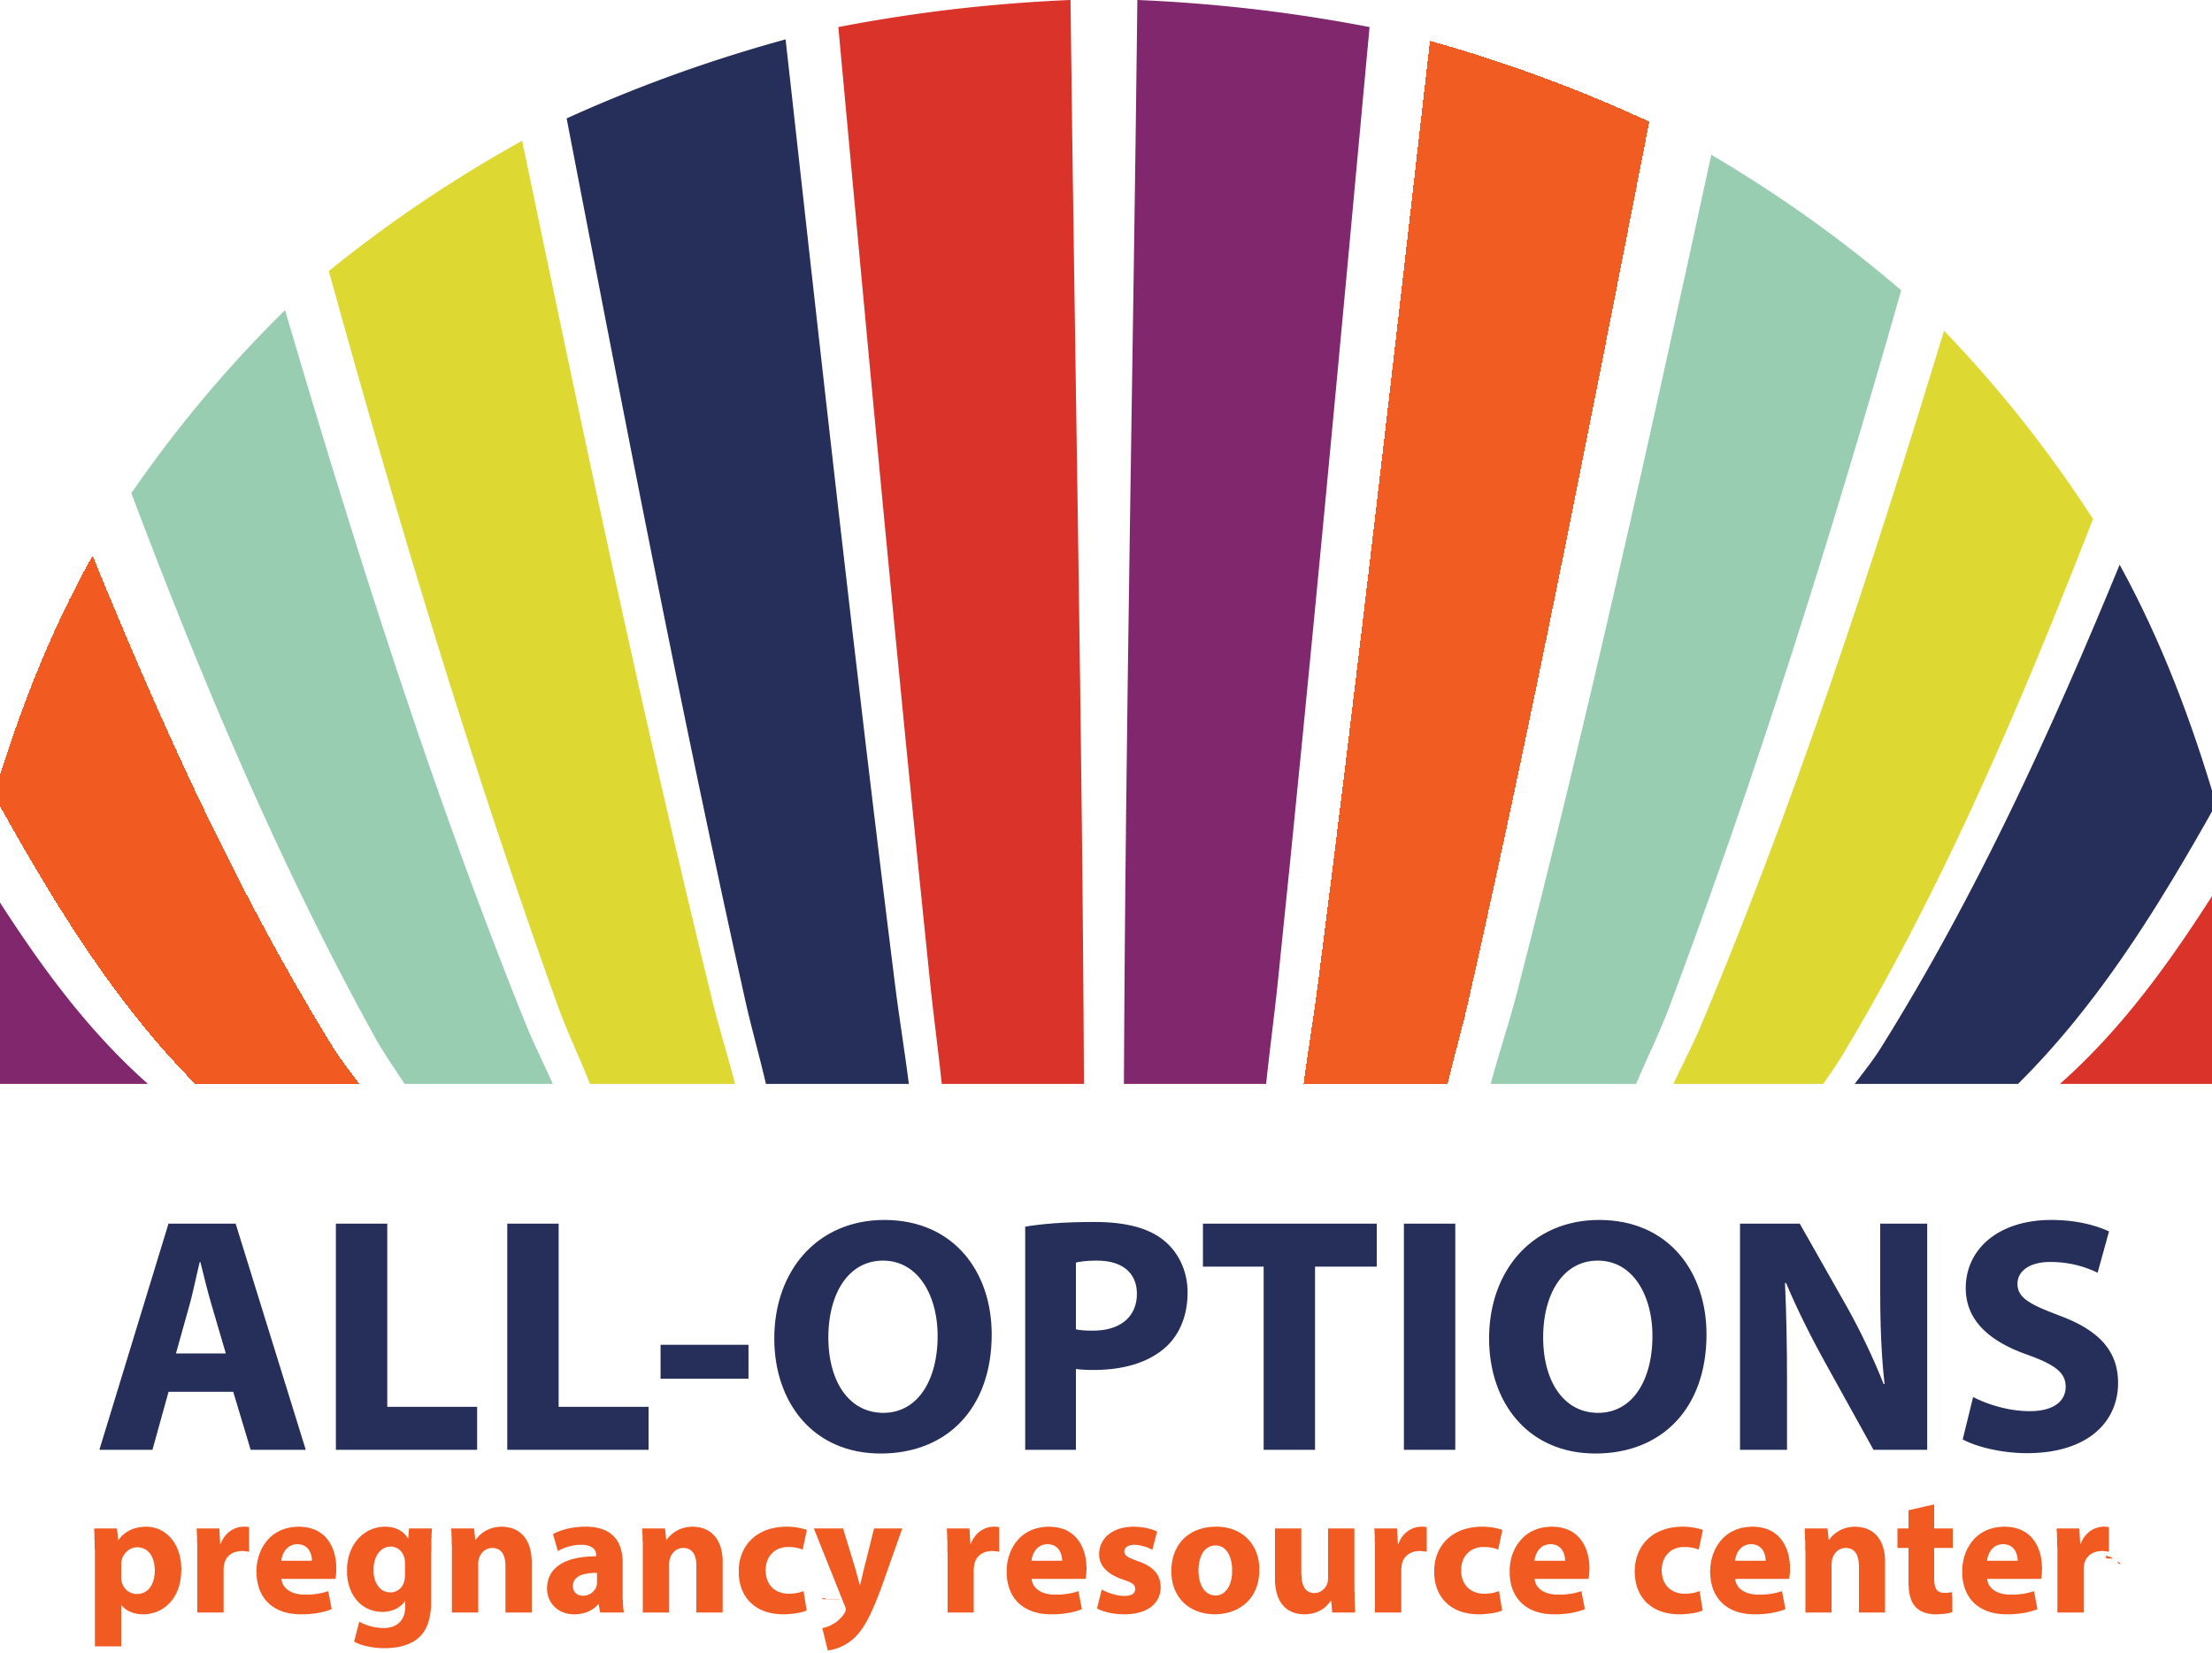 All-Options Pregnancy Resource Center